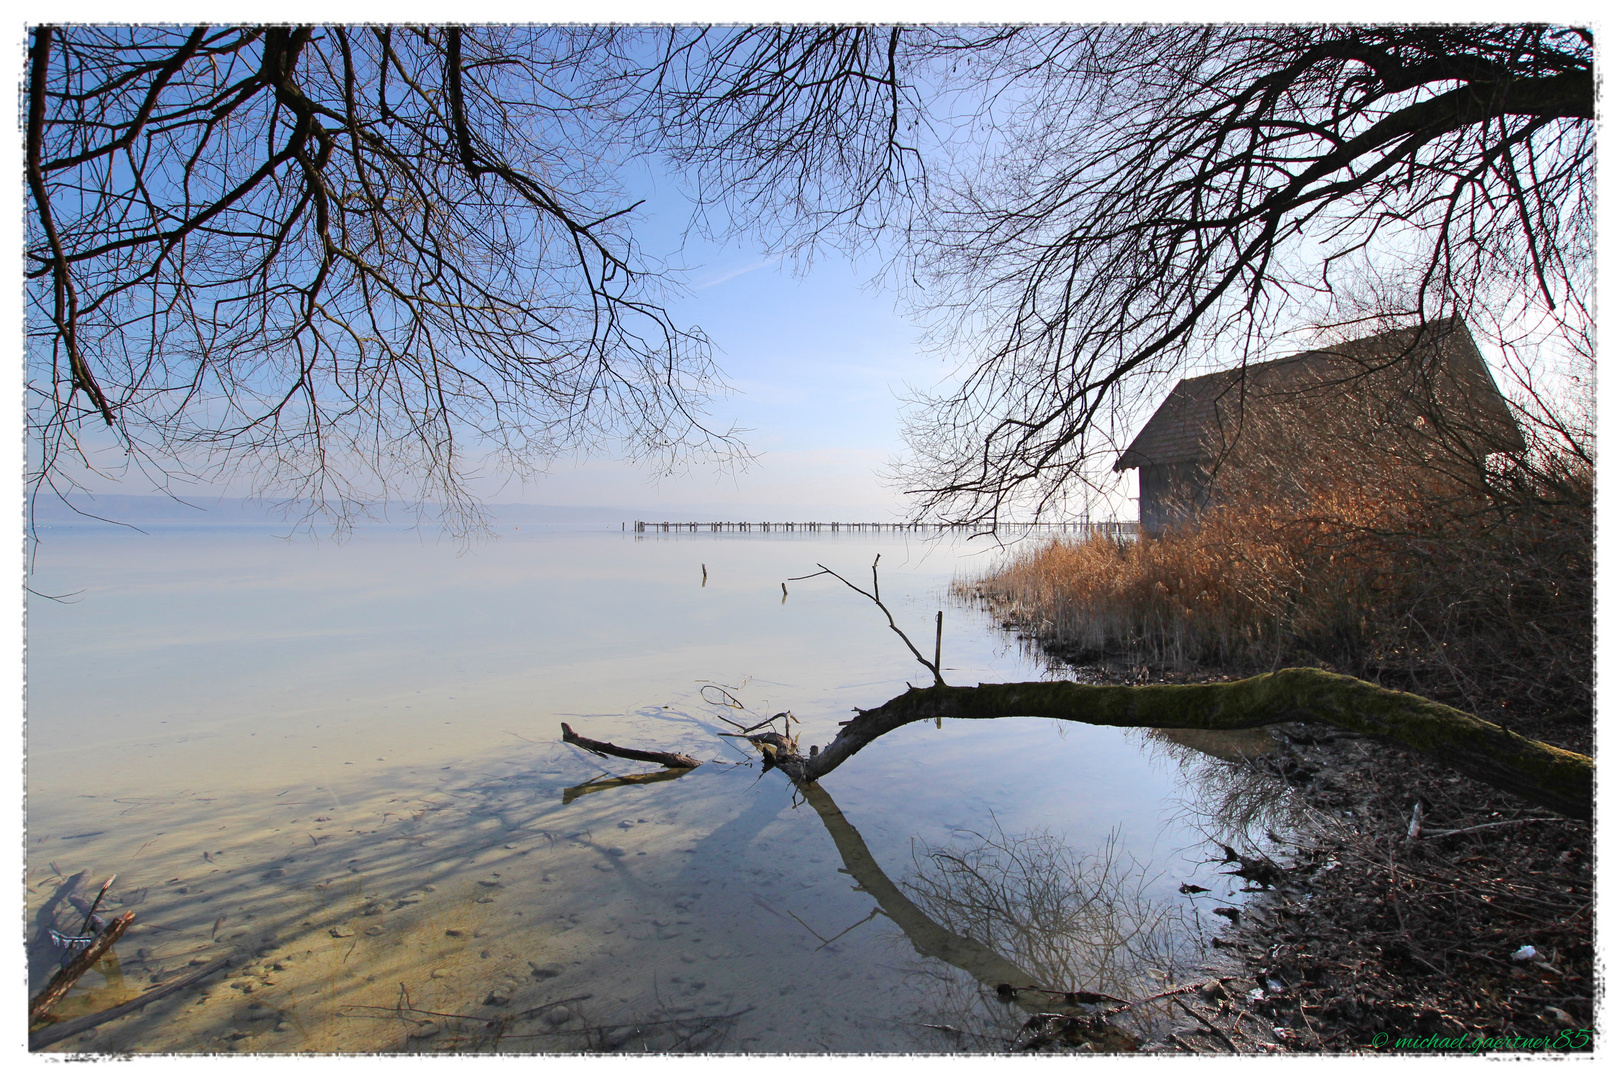 Bootshaus am Ammersee